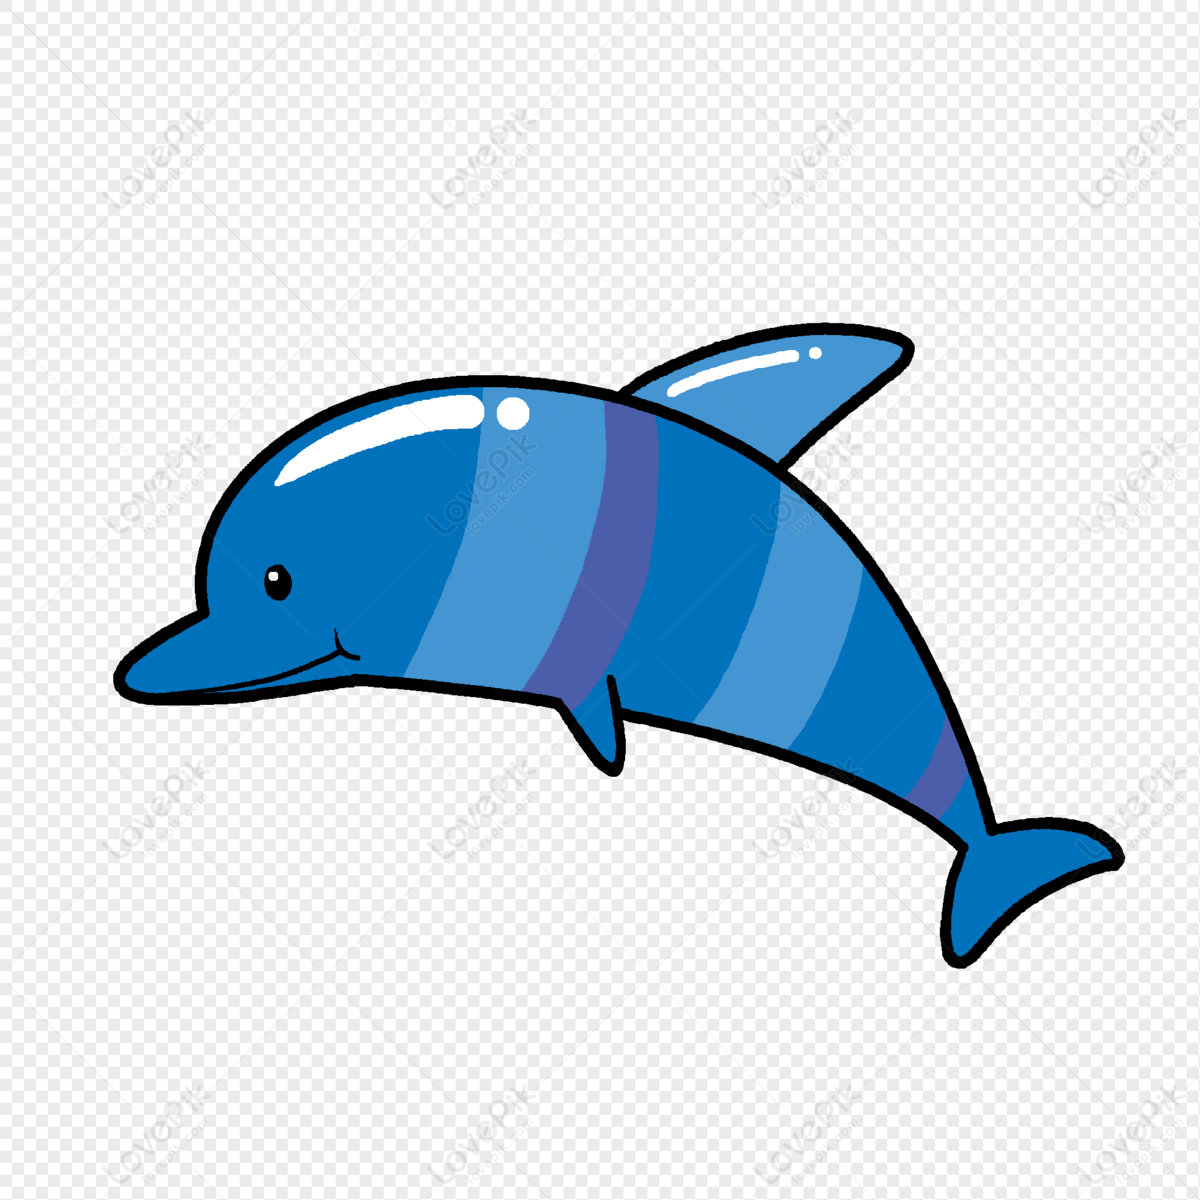 Cartoon Dolphin PNG Picture And Clipart Image For Free Download - Lovepik |  401077035